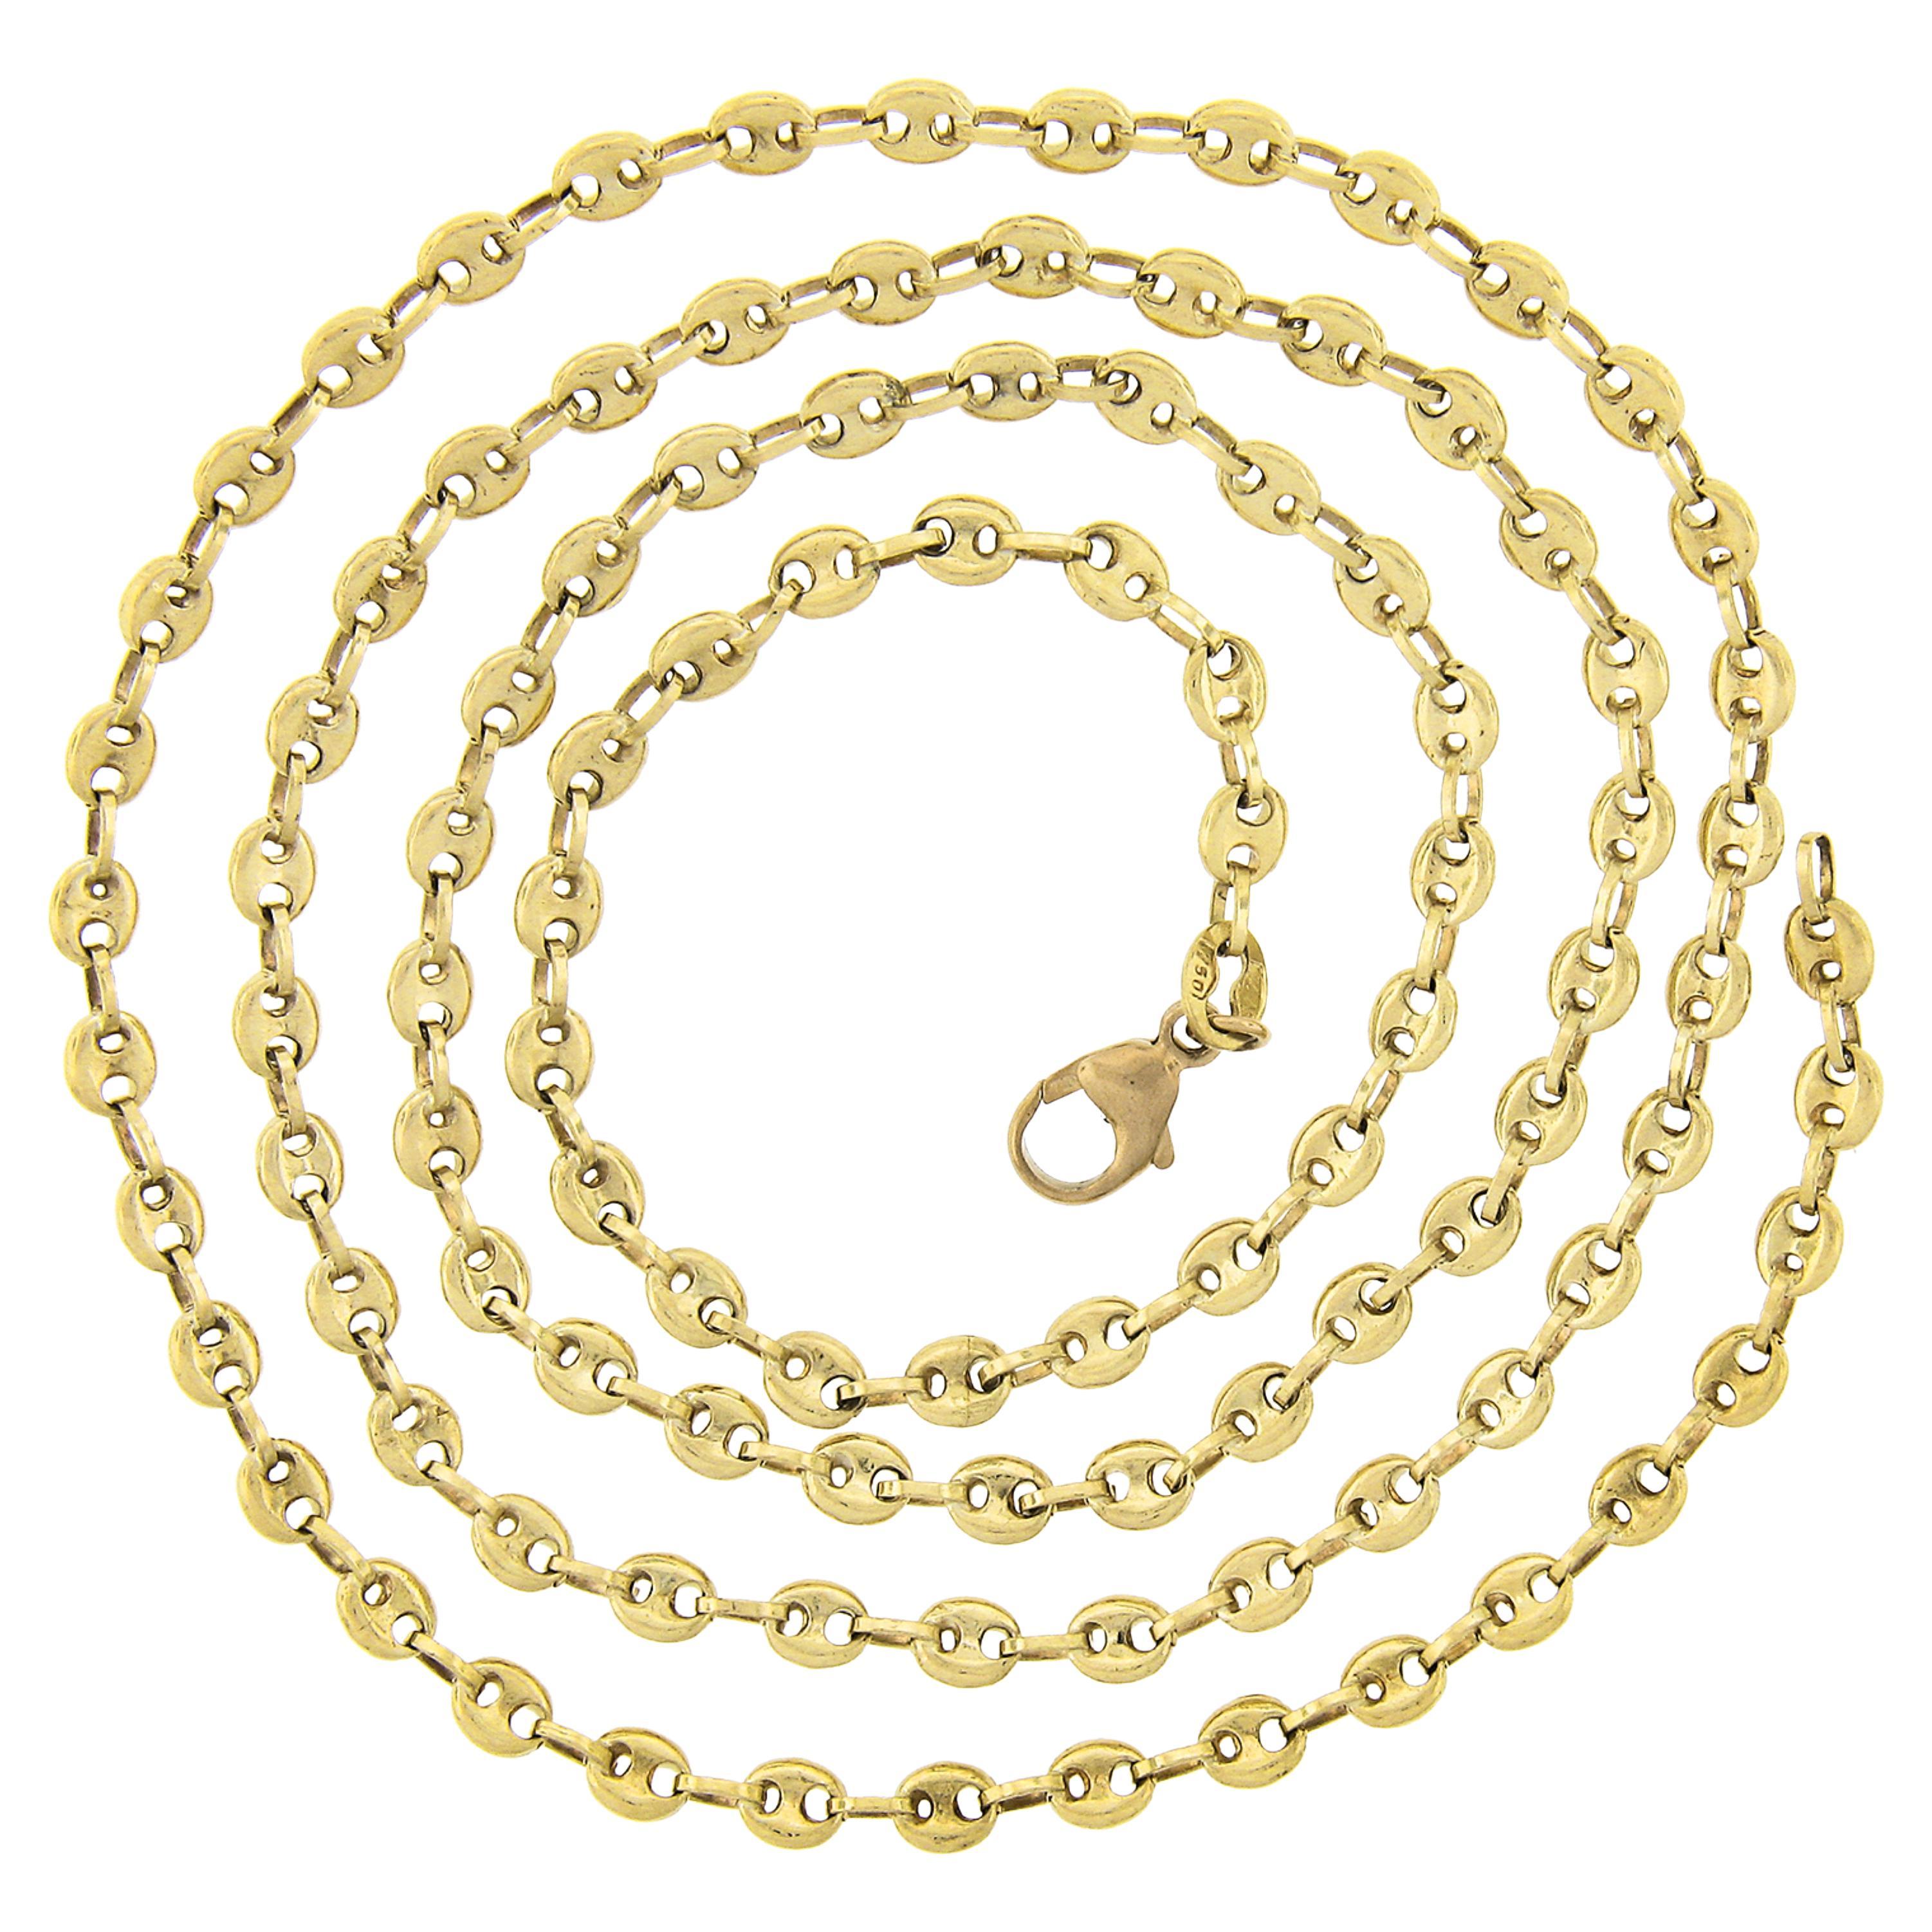 Unisex Solid 18k Yellow Gold Polished Puffed Mariner Link Chain Necklace